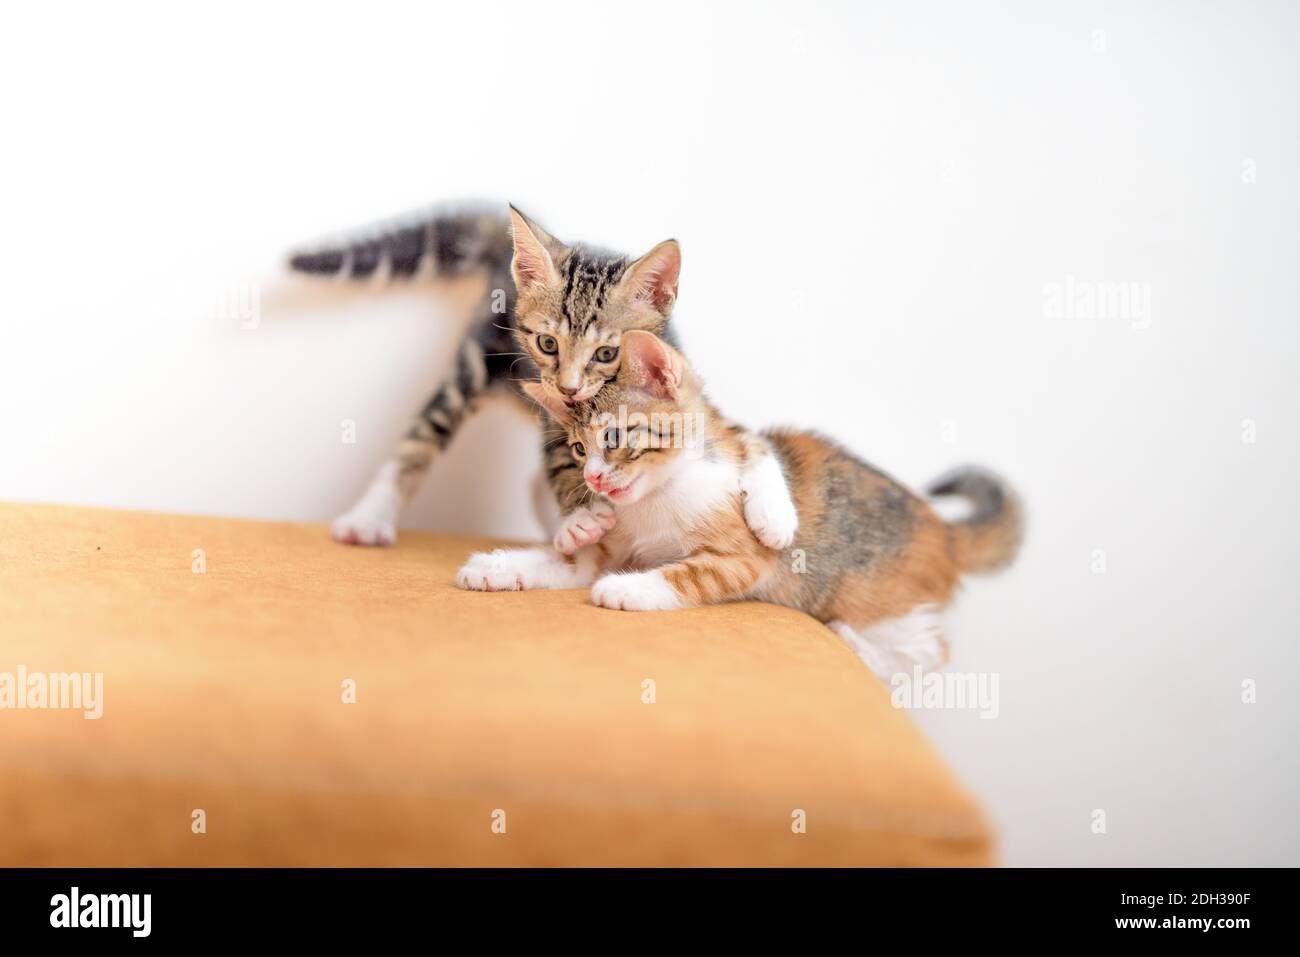 Kittens playing together Stock Photo